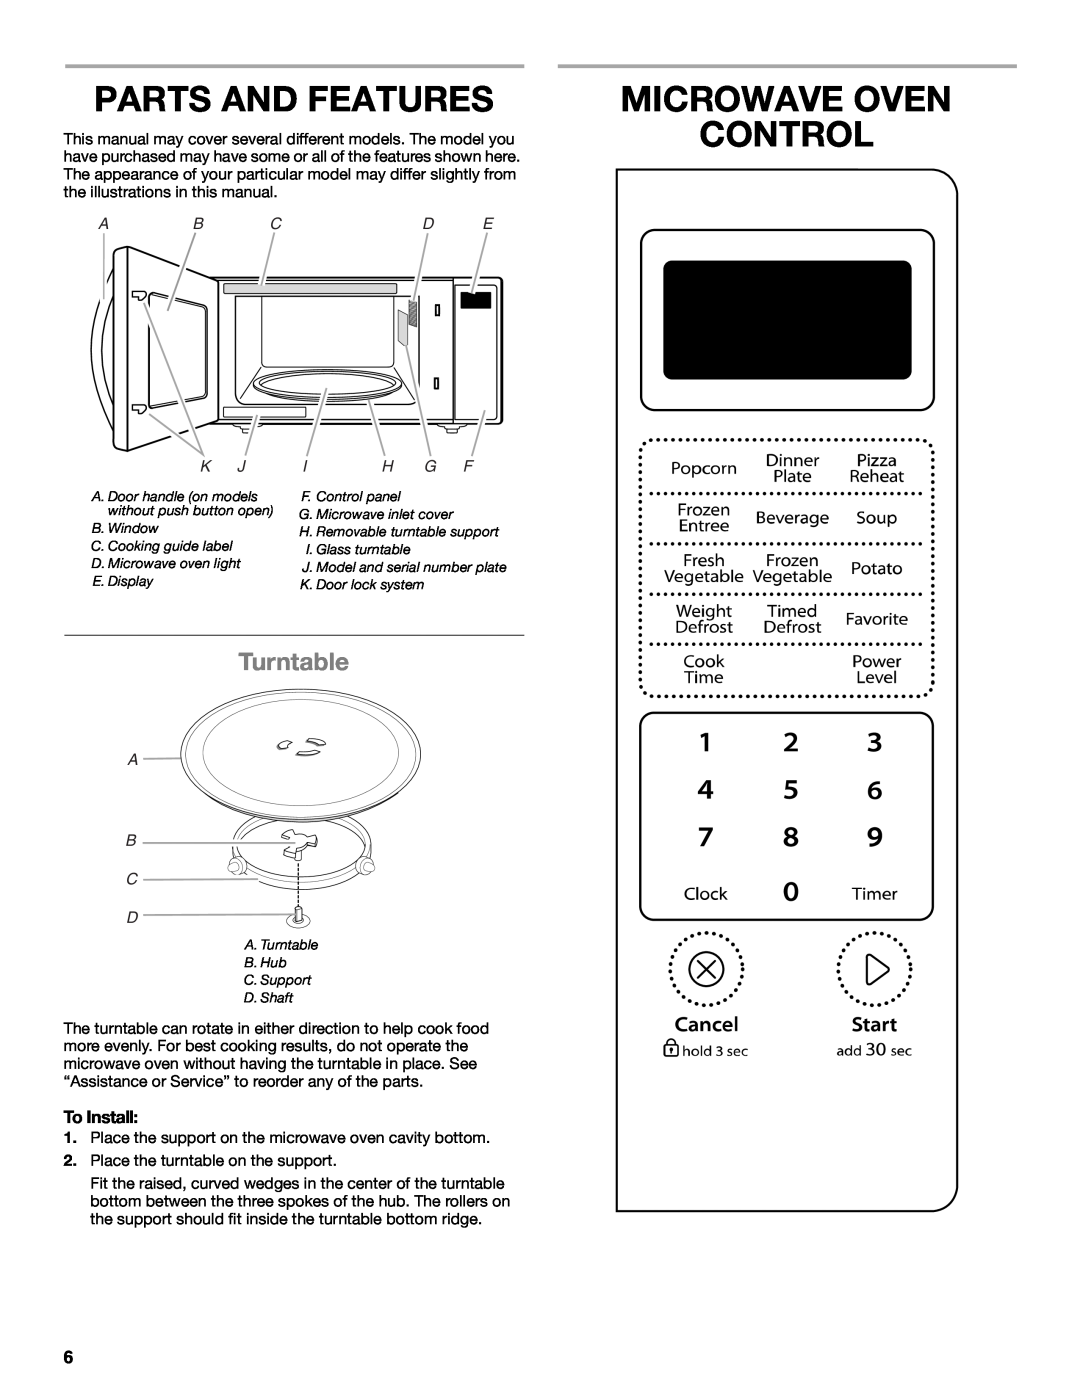 Whirlpool WMC50522 manual Parts And Features, Microwave Oven Control, Turntable, Ab Cd E, I H G F, A B C D 